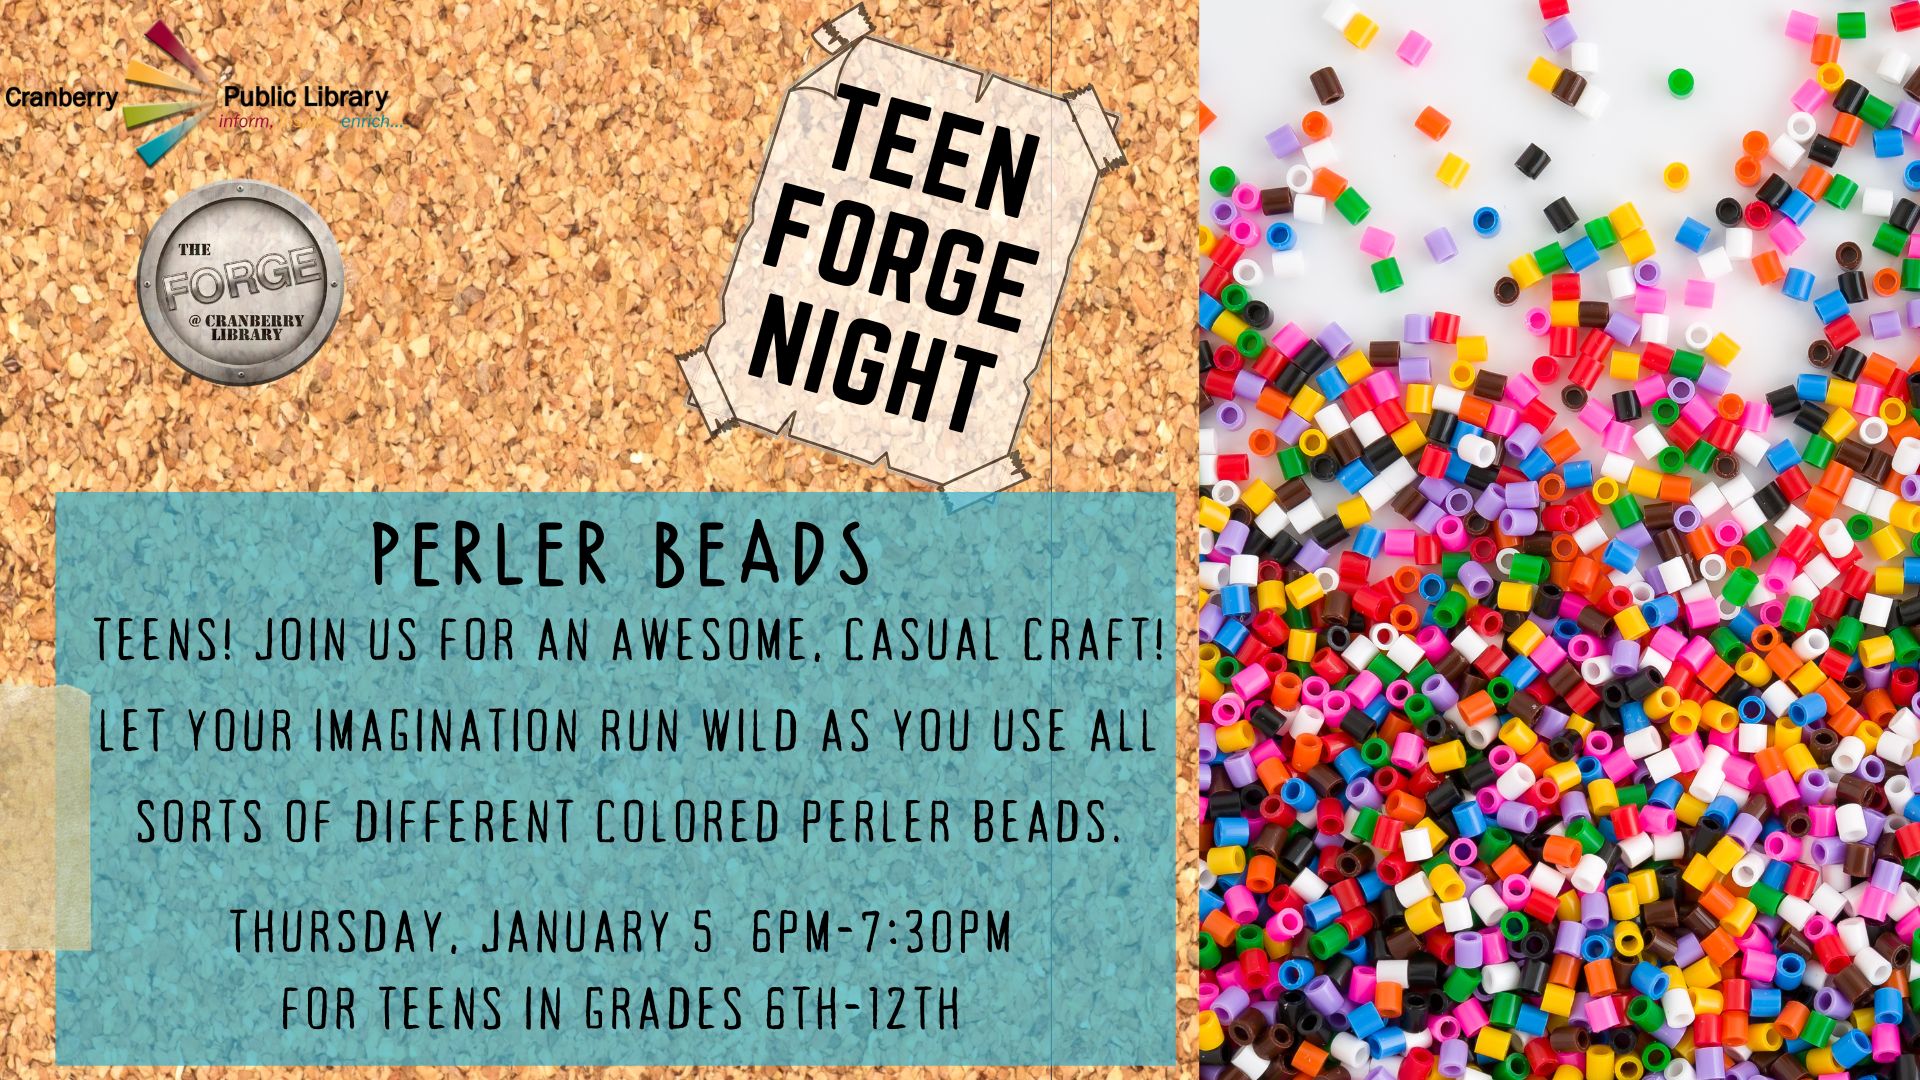 Flyer for Teen Forge Night with image of perler beads